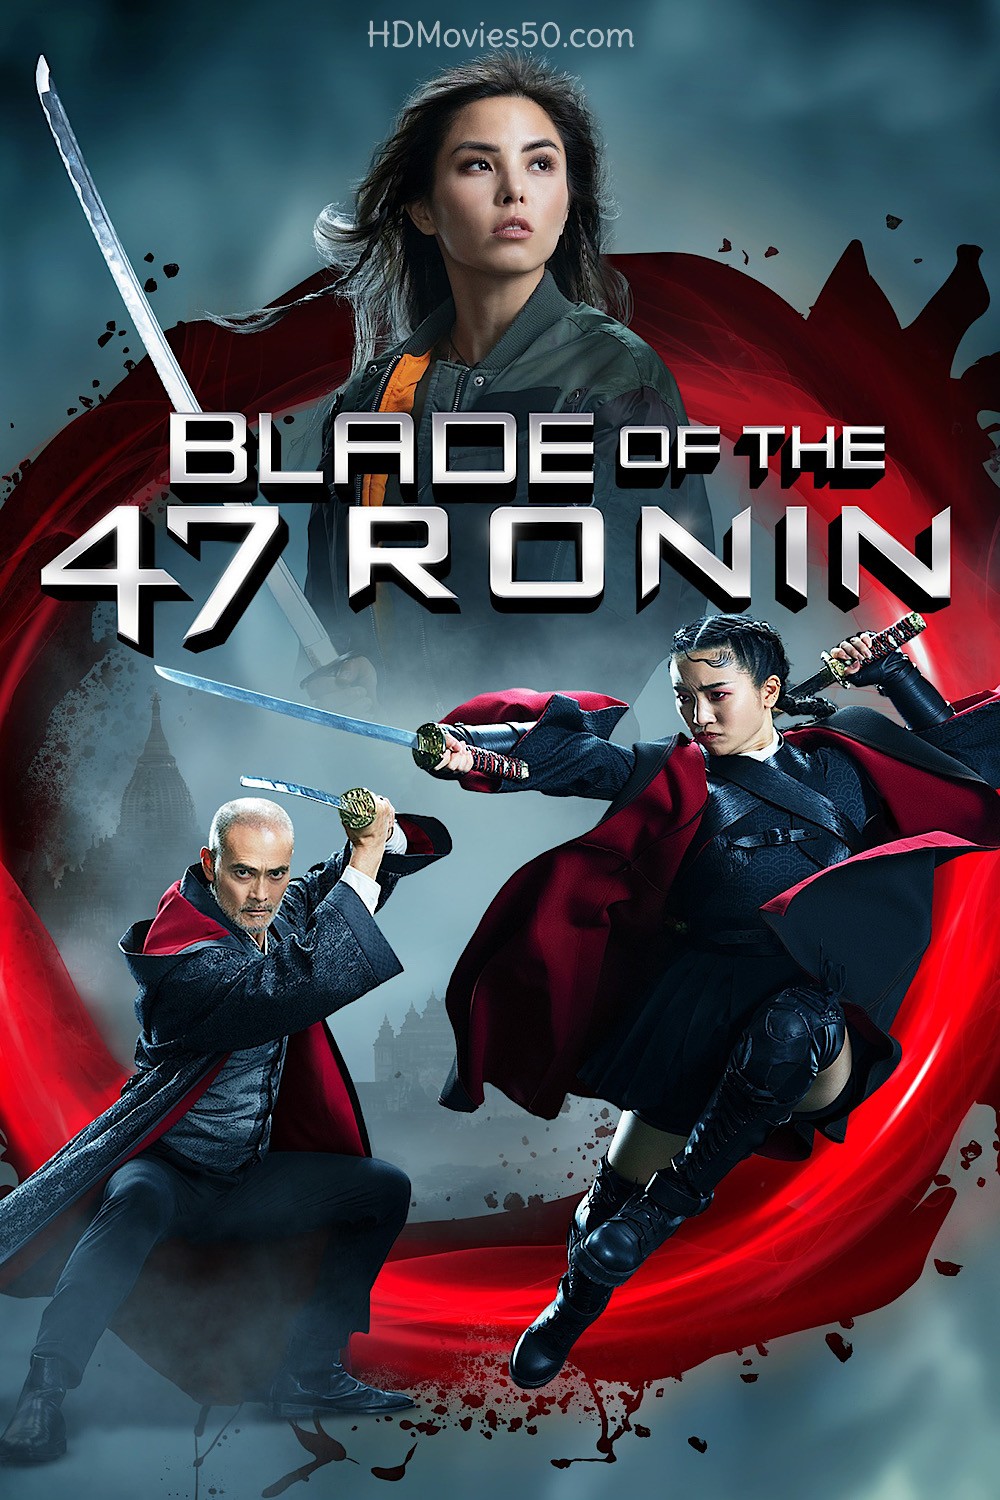 Blade of the 47 Ronin 2022 English Movie 480p BluRay 400MB Download